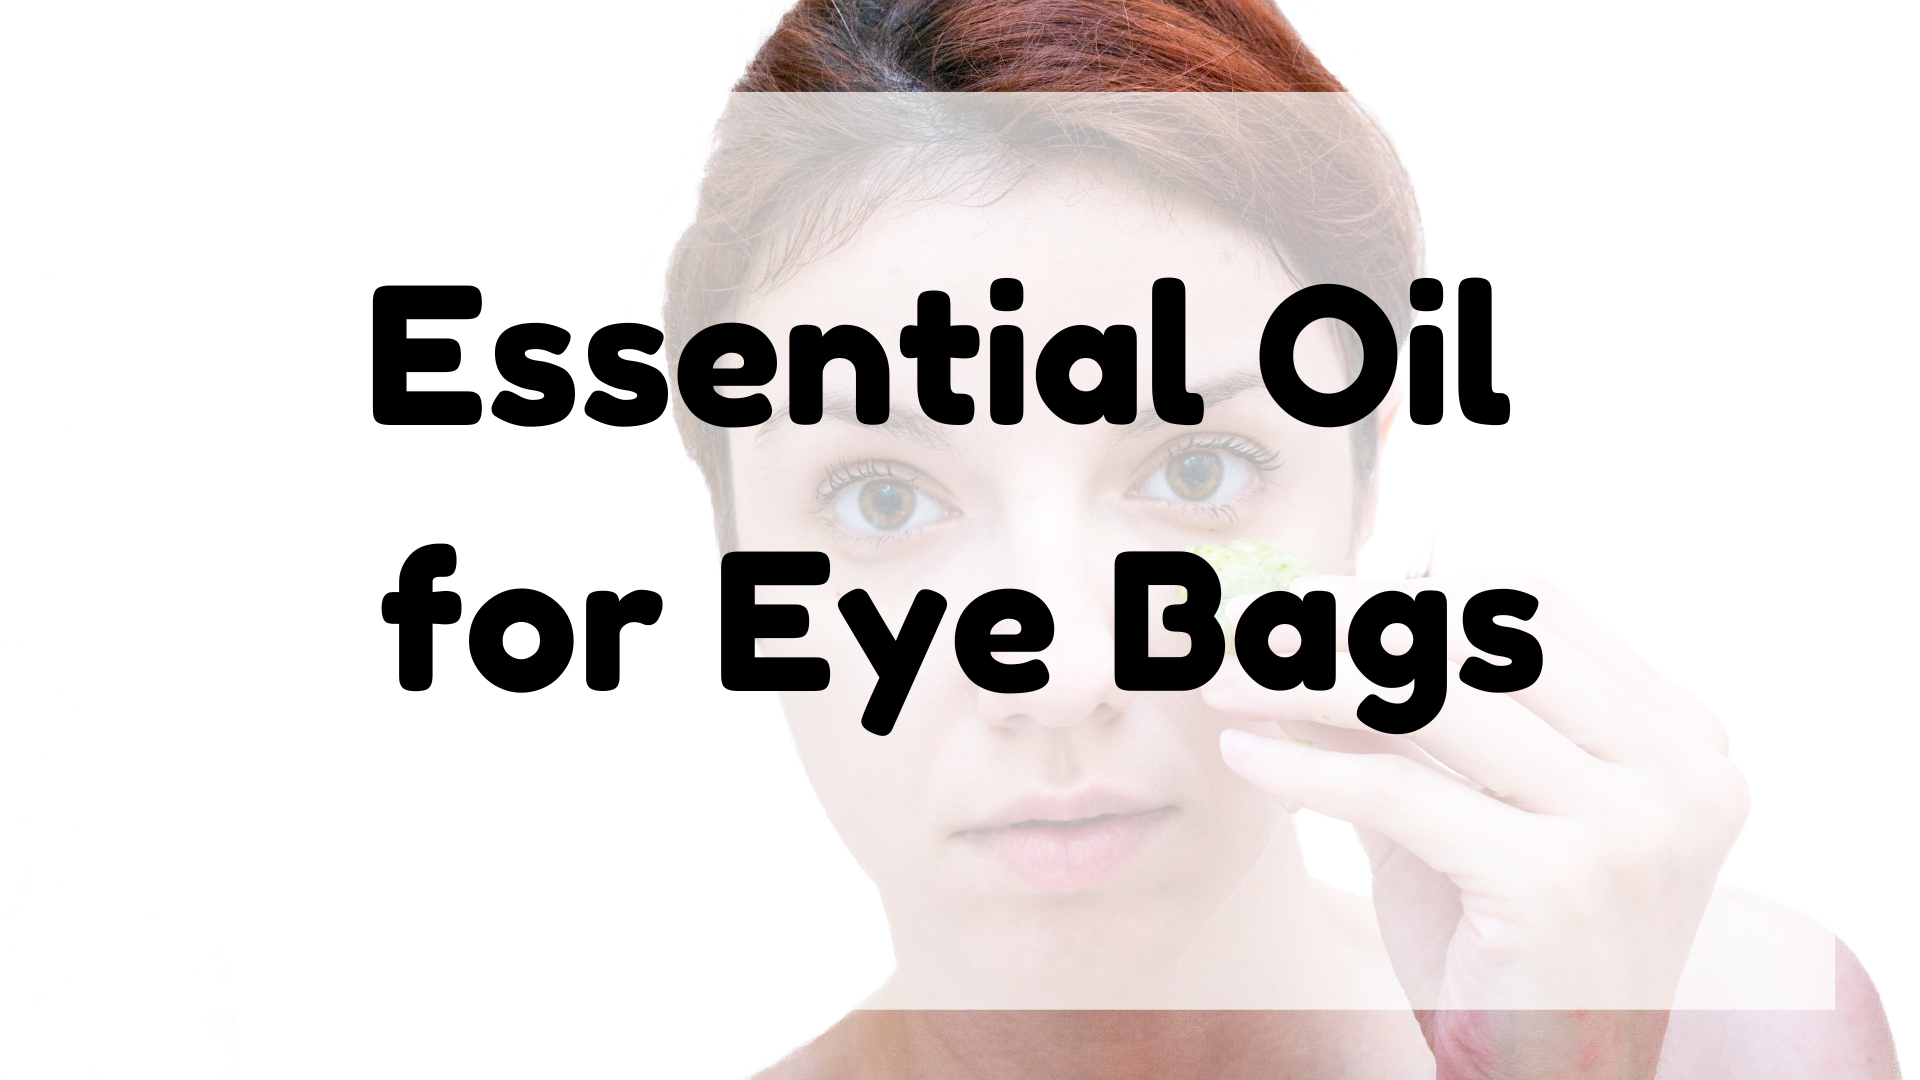 Essential Oil for Eye Bags featured image